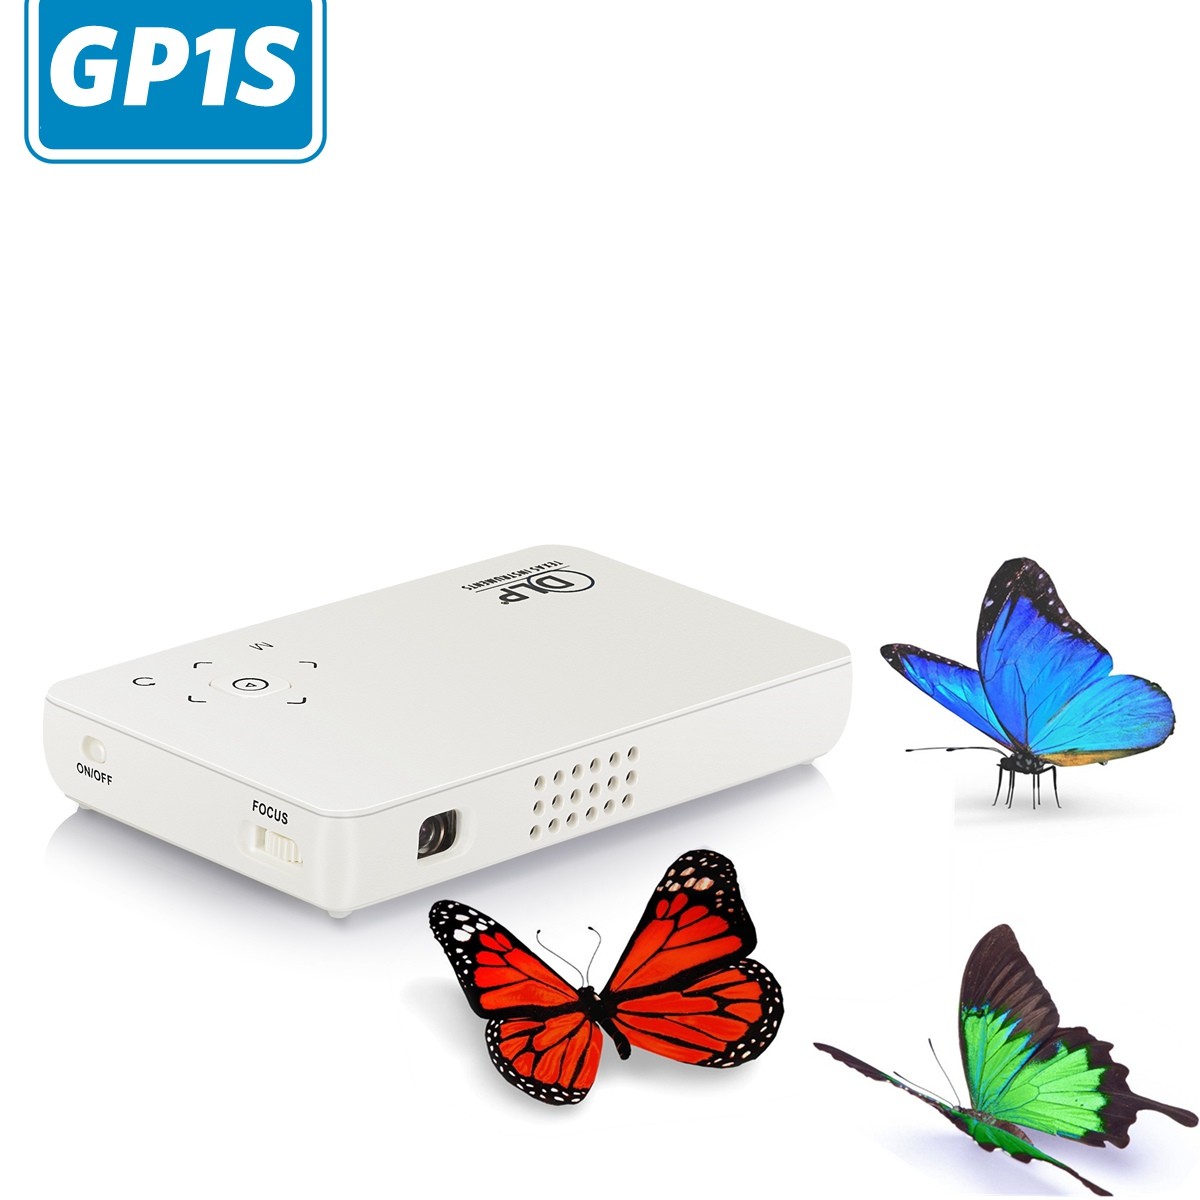 simplebeamer GP1S DLP PICO led Projector,real portable micro projector,800x480,200 lumens exceed full hd  projector